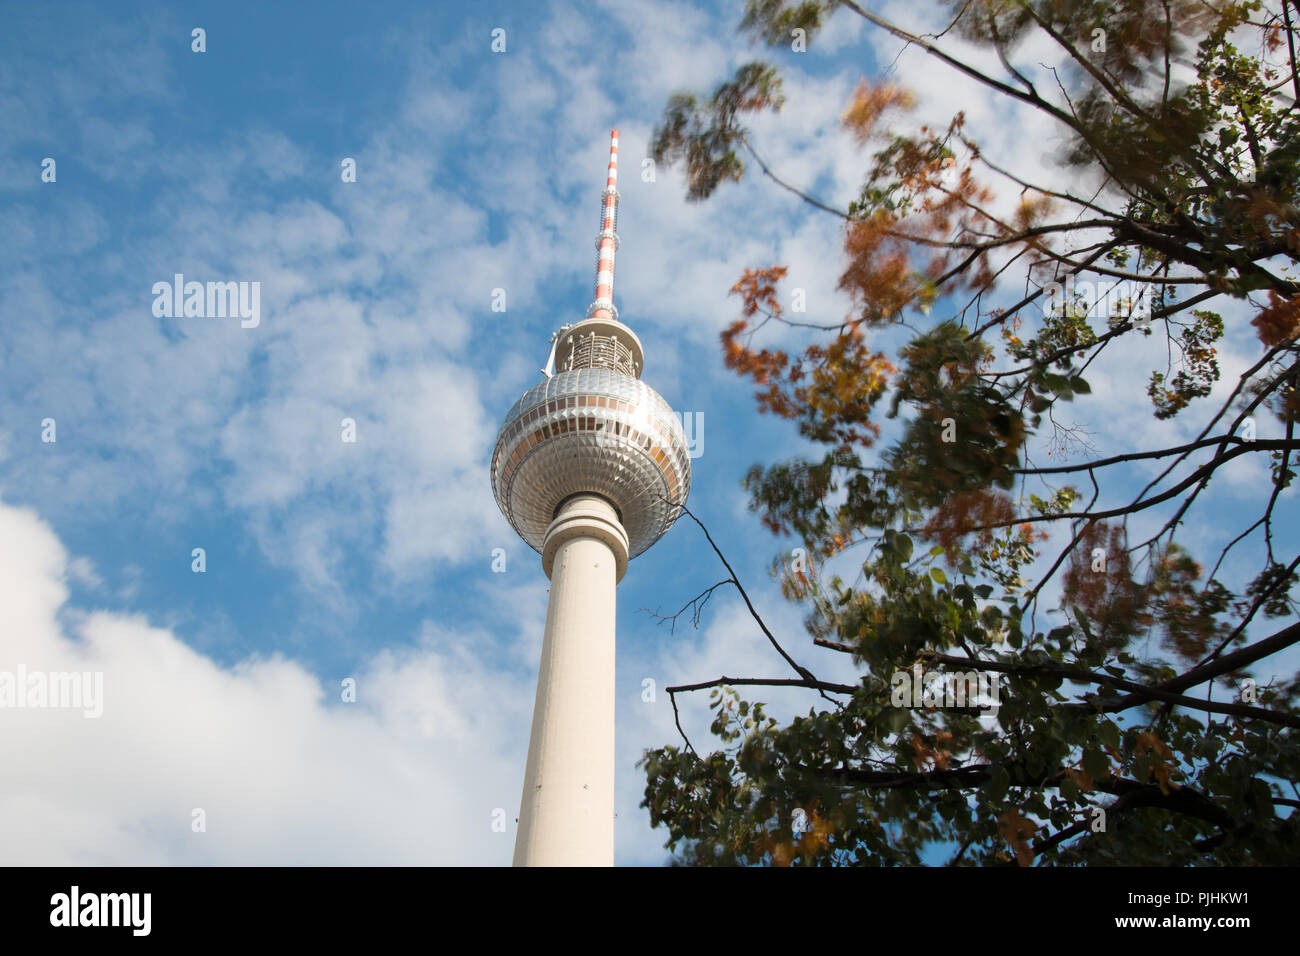 Berlin, Germany - September 5, 2018: View of the television tower, landmark of Berlin, Germany. Stock Photo